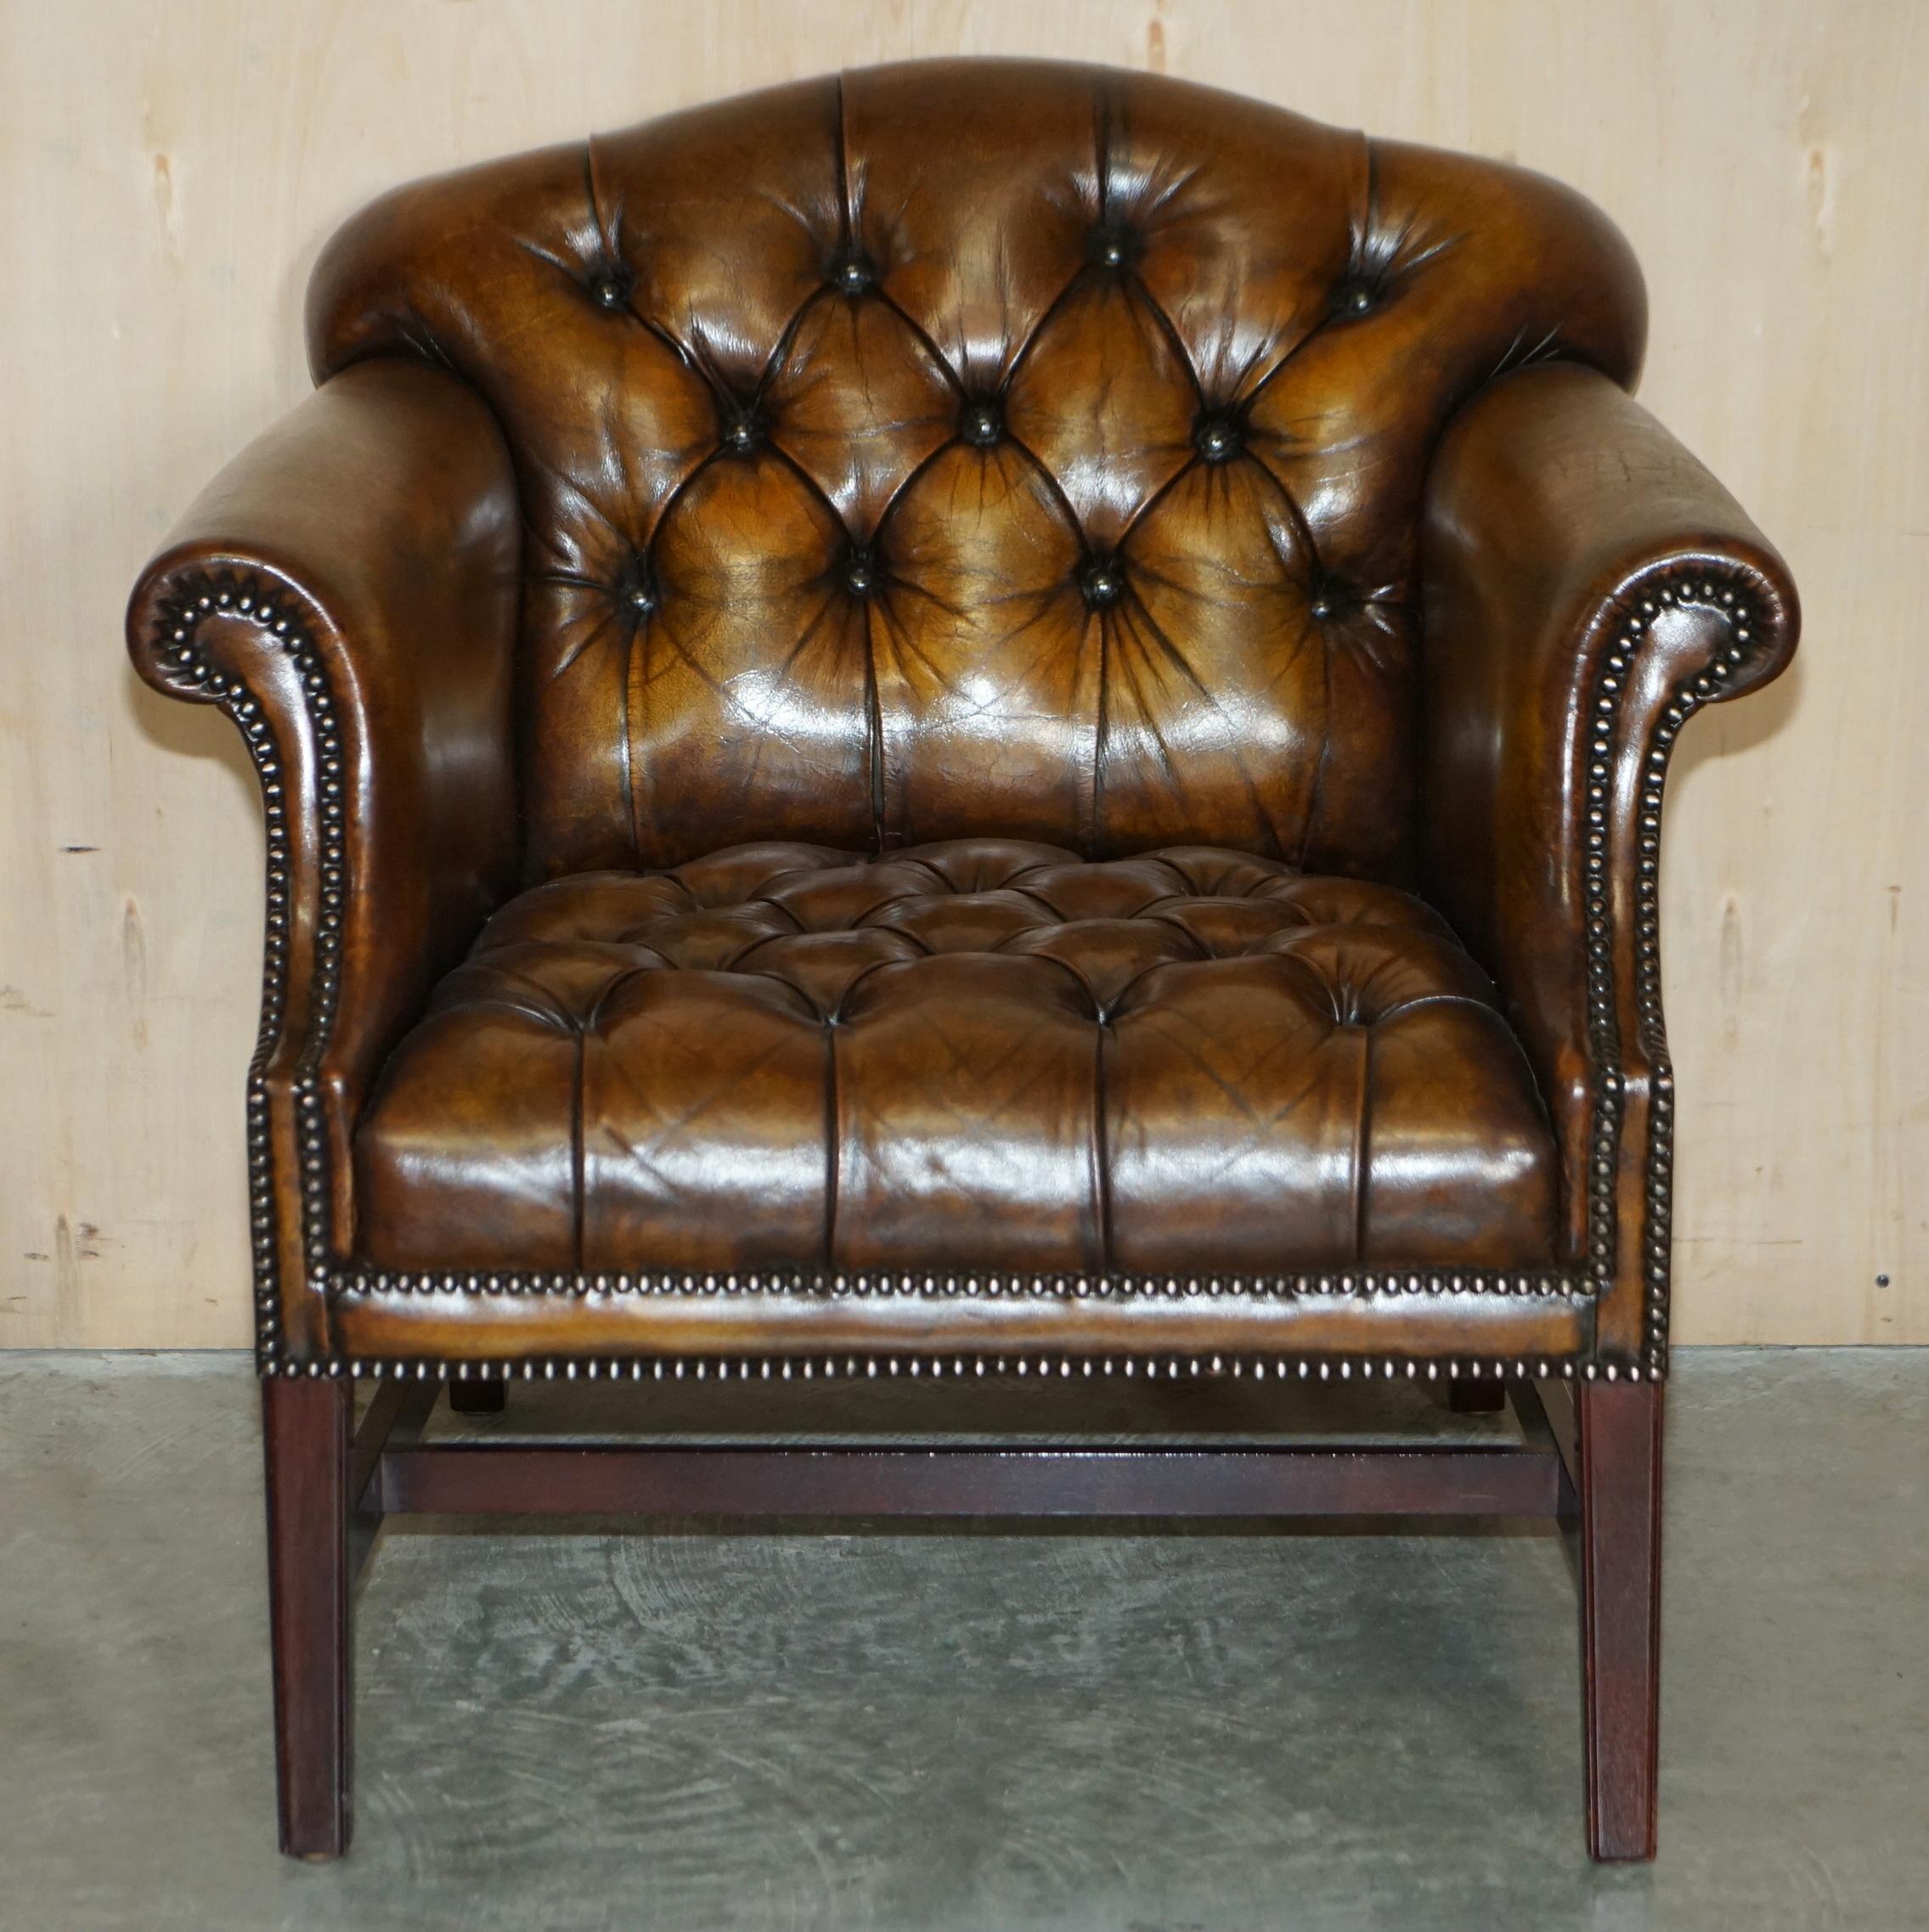 We are delighted to offer for sale this absolutely stunning, circa 1900 fully restored Chesterfield tufted library armchair

A very rare find, I never come across original library armchairs any more

The restoration has been extensive, my